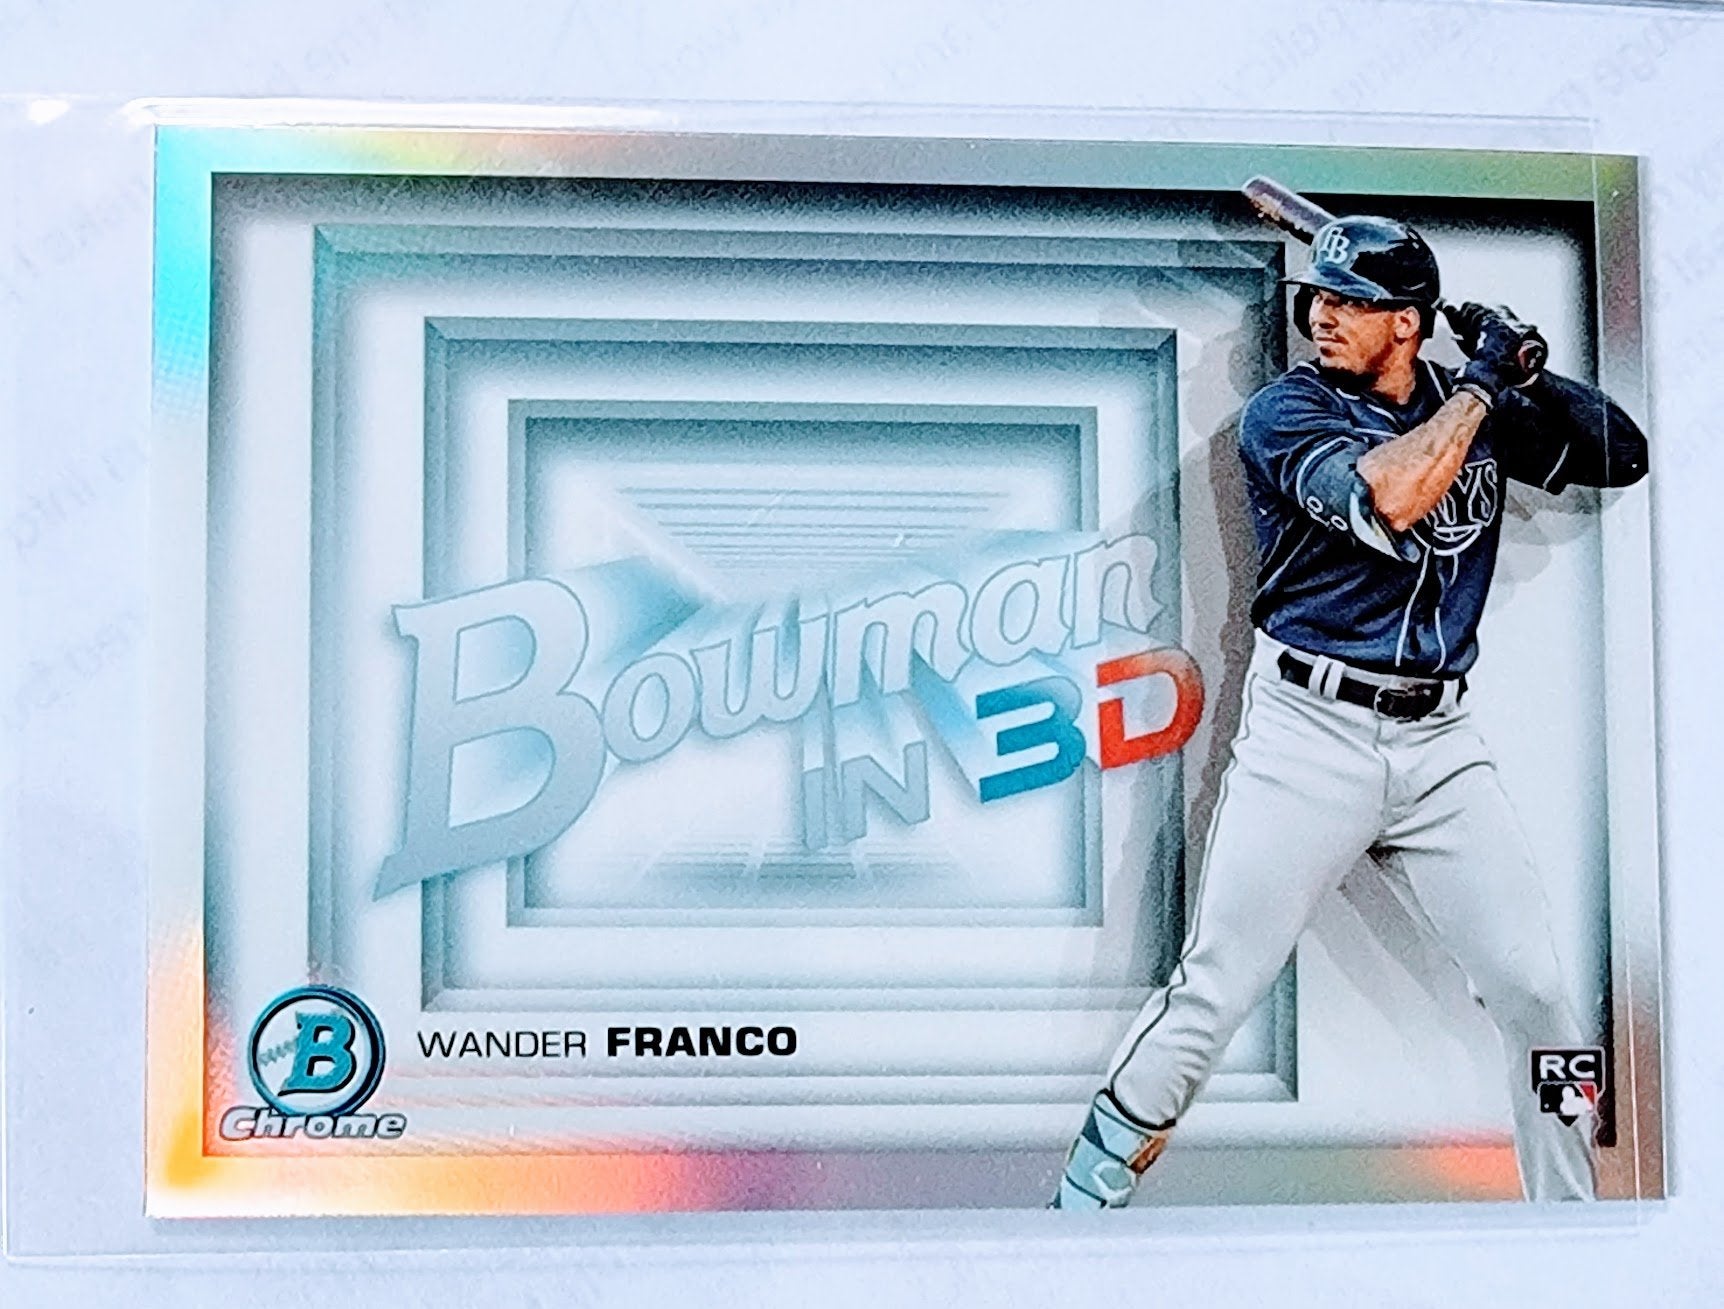 2022 Bowman Chrome Wander Franco Bowman In 3D Rookie Refractor Baseball Trading Card GRB1 simple Xclusive Collectibles   